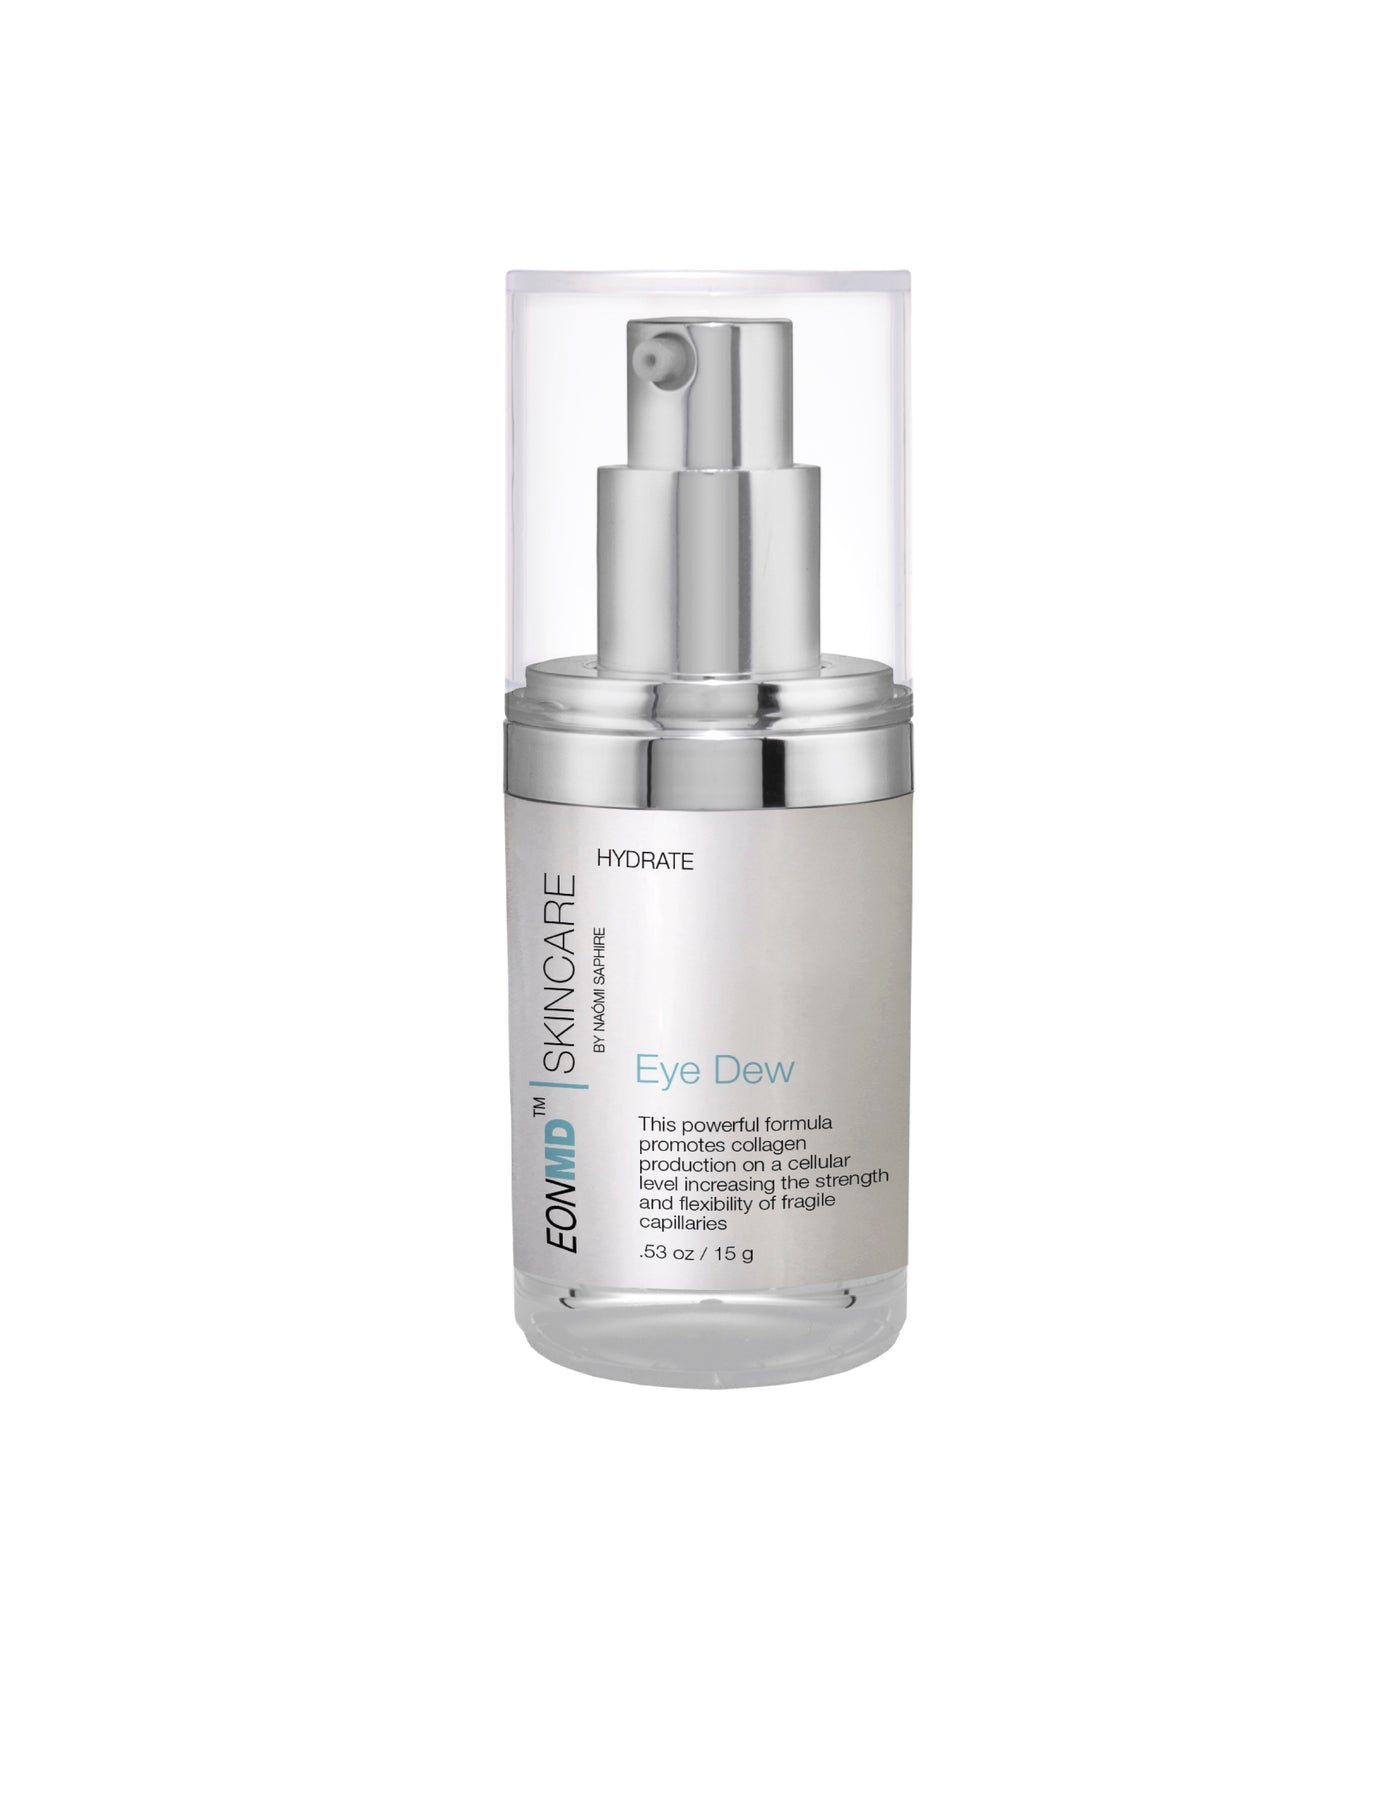 Eye Dew is a clinically proven combination of 5-in-1 active ingredi- ents, with 6 main benefits to reduce the appearance of dark circles, puffiness and wrinkles around the eye area. On the cellular level, peptides and vitamins promote collagen growth, increase the strength and flexibility of fragile capillaries, and stimulate circulation around the eyes.